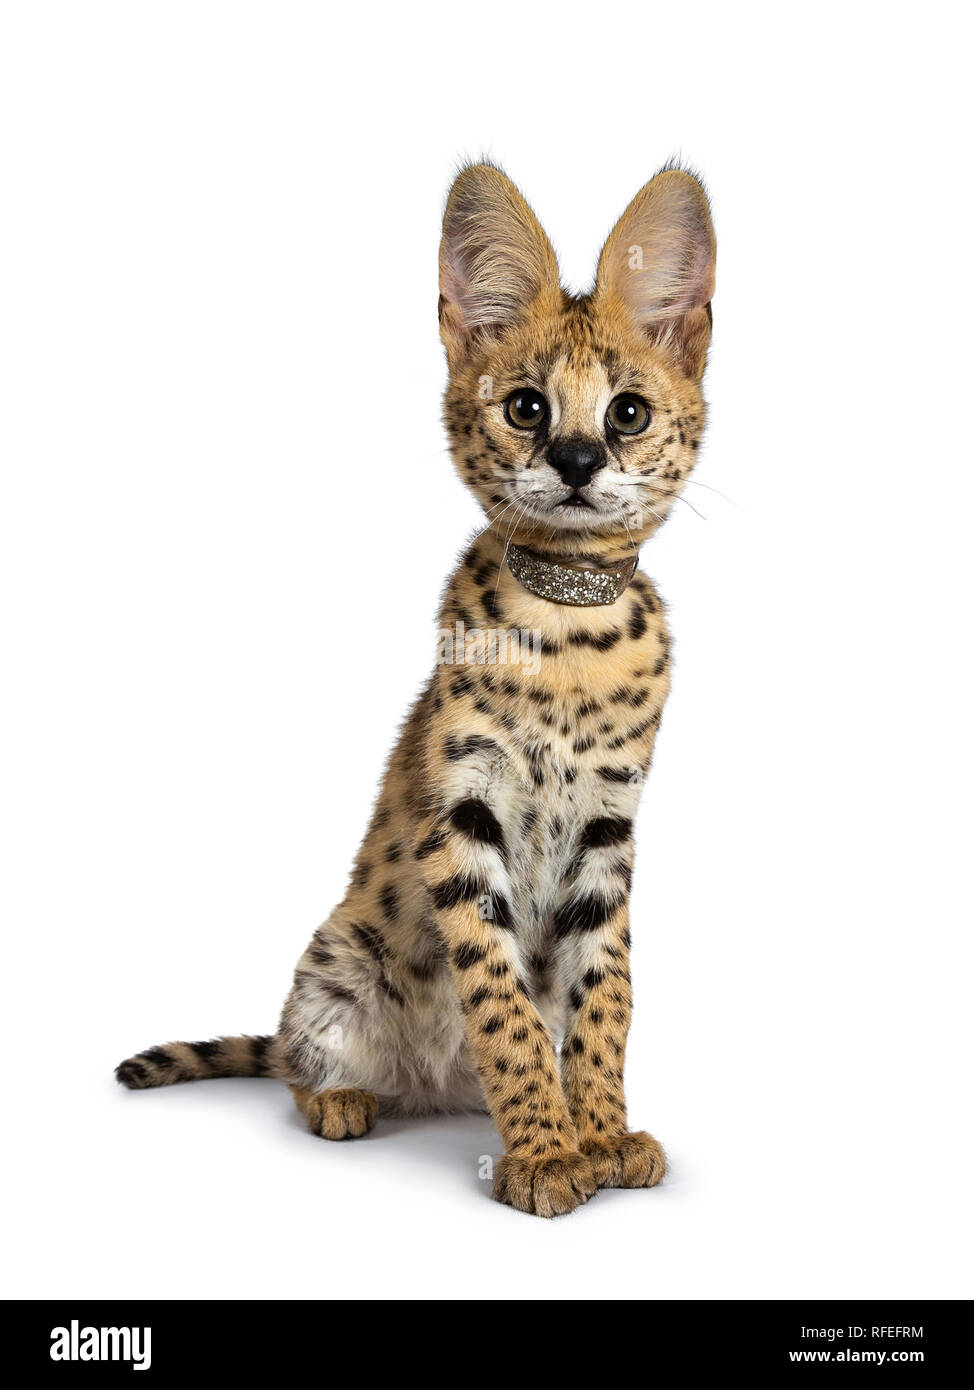 Cute 4 months young Serval cat kitten sitting slightly side ways straight up, wearing shiny collar. Looking at lens with sweet eyes. Tail beside body. Stock Photo